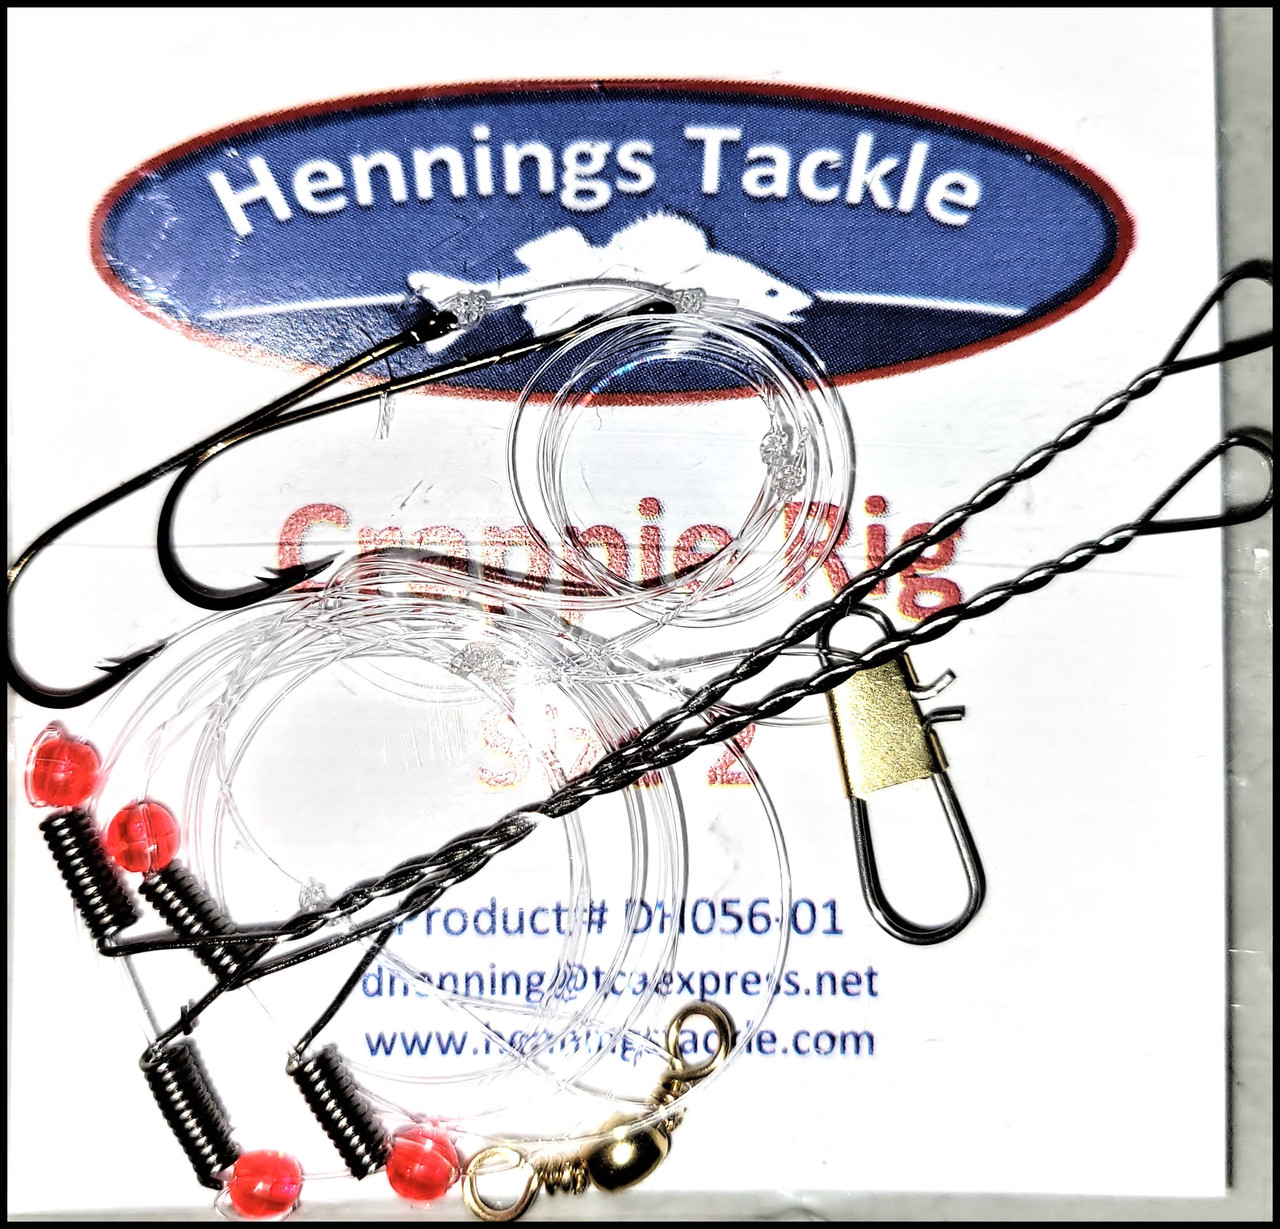 Crappie Rig - Size 2 - Henning's Tackle